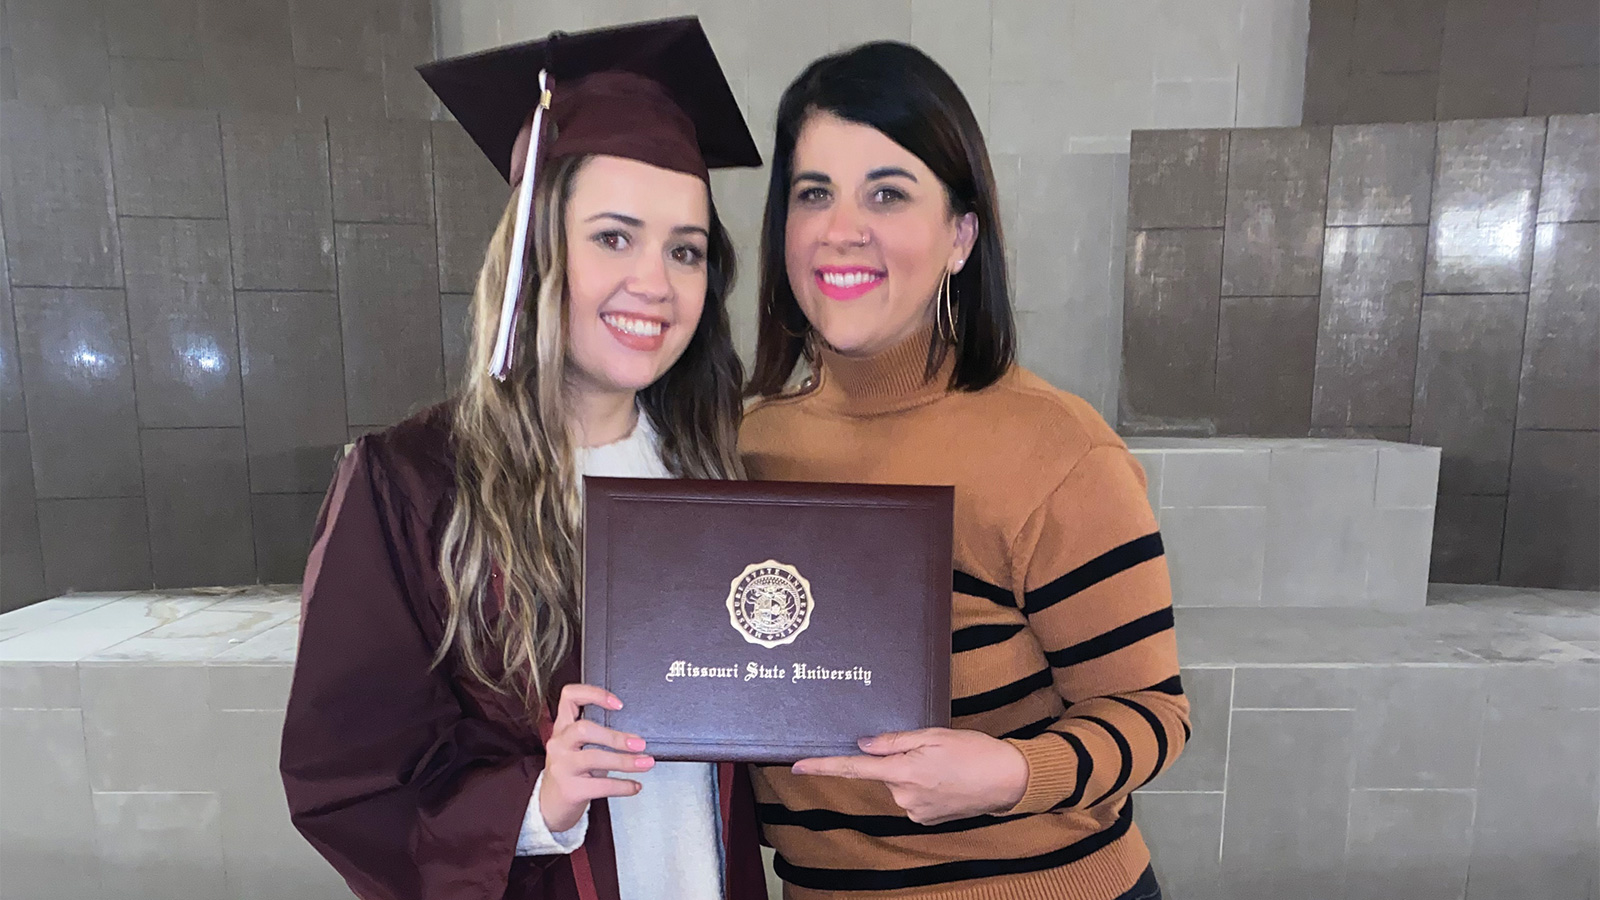 Kim and her daughter on graduation day from Missouri State University